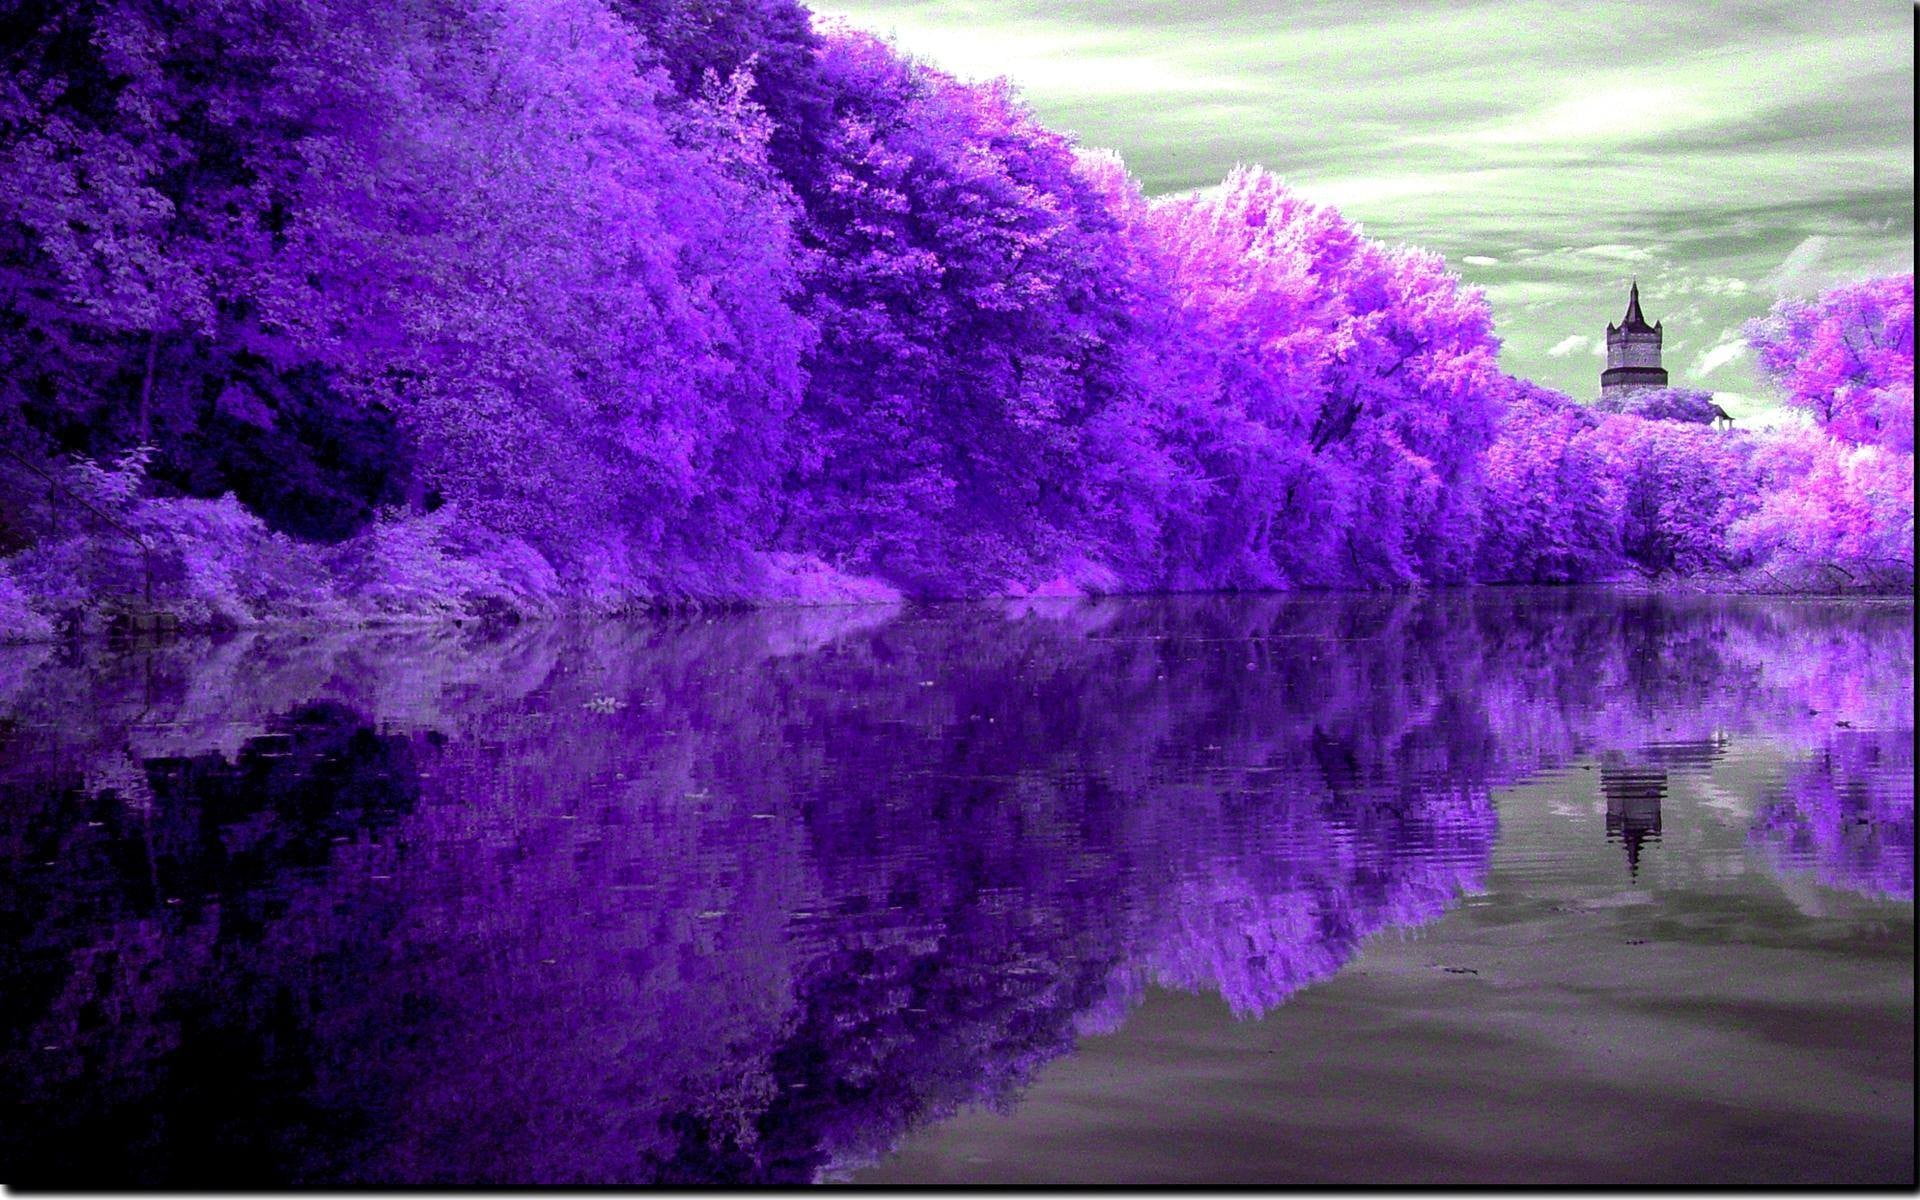 Mesmerizing Wallpaper purple landscape Images, Videos, and News